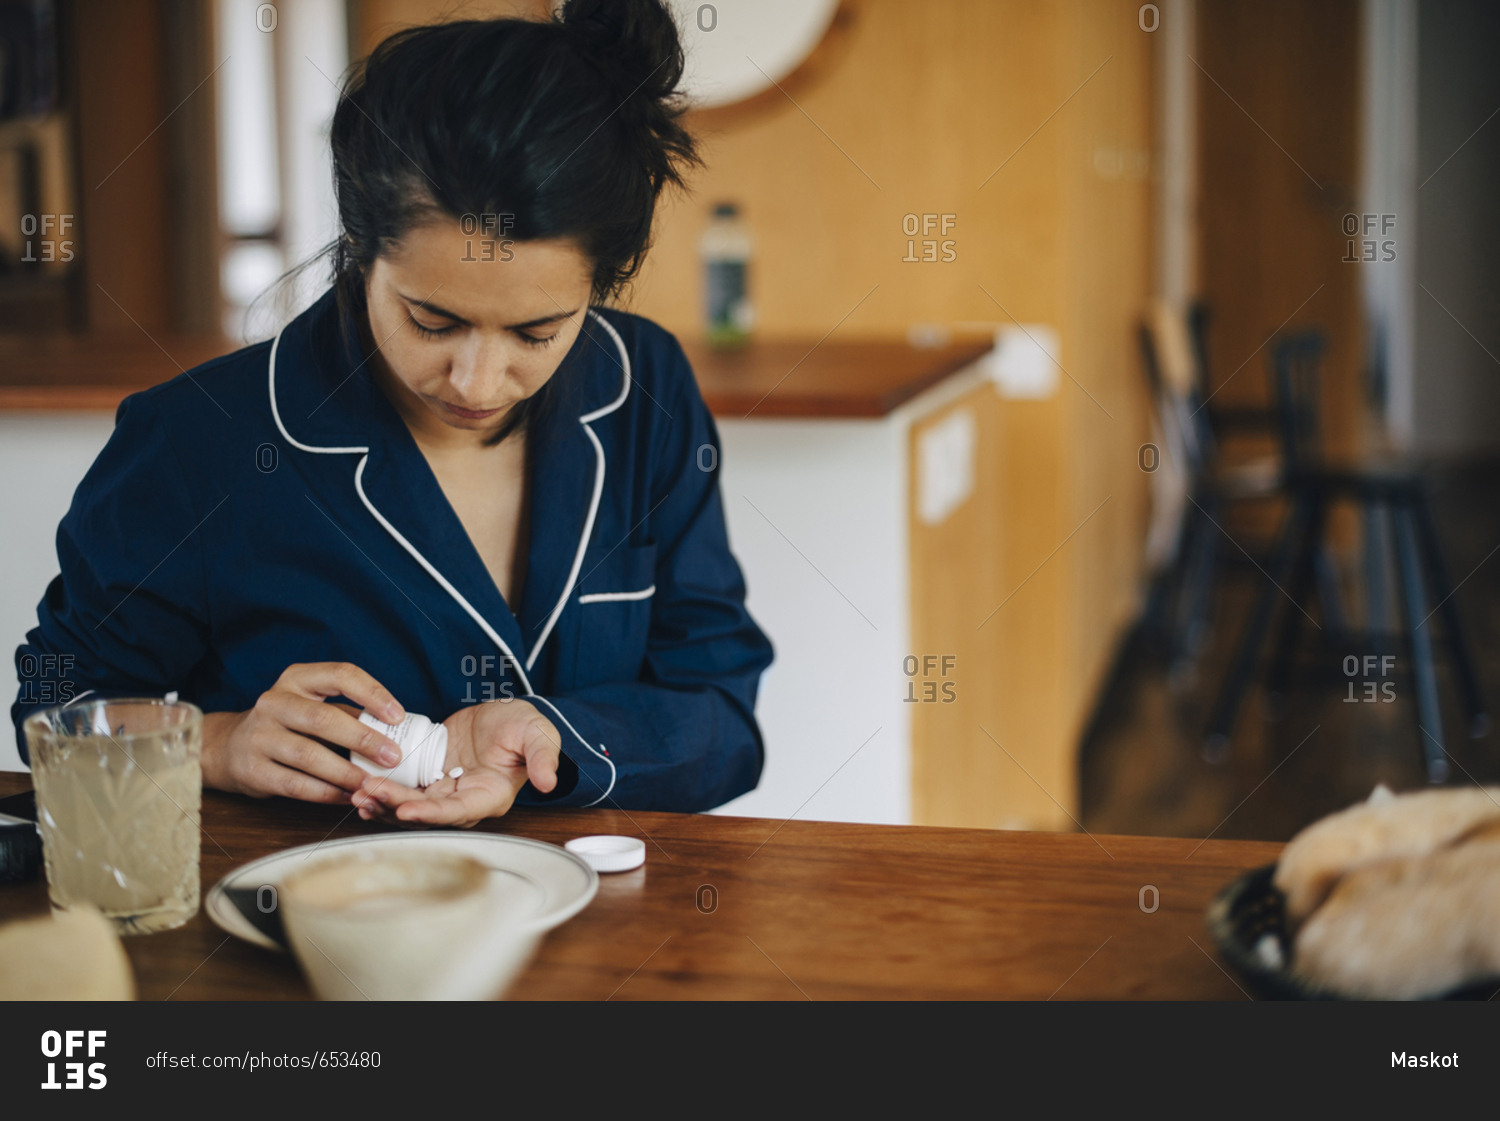 Woman taking medicine during breakfast while sitting at table